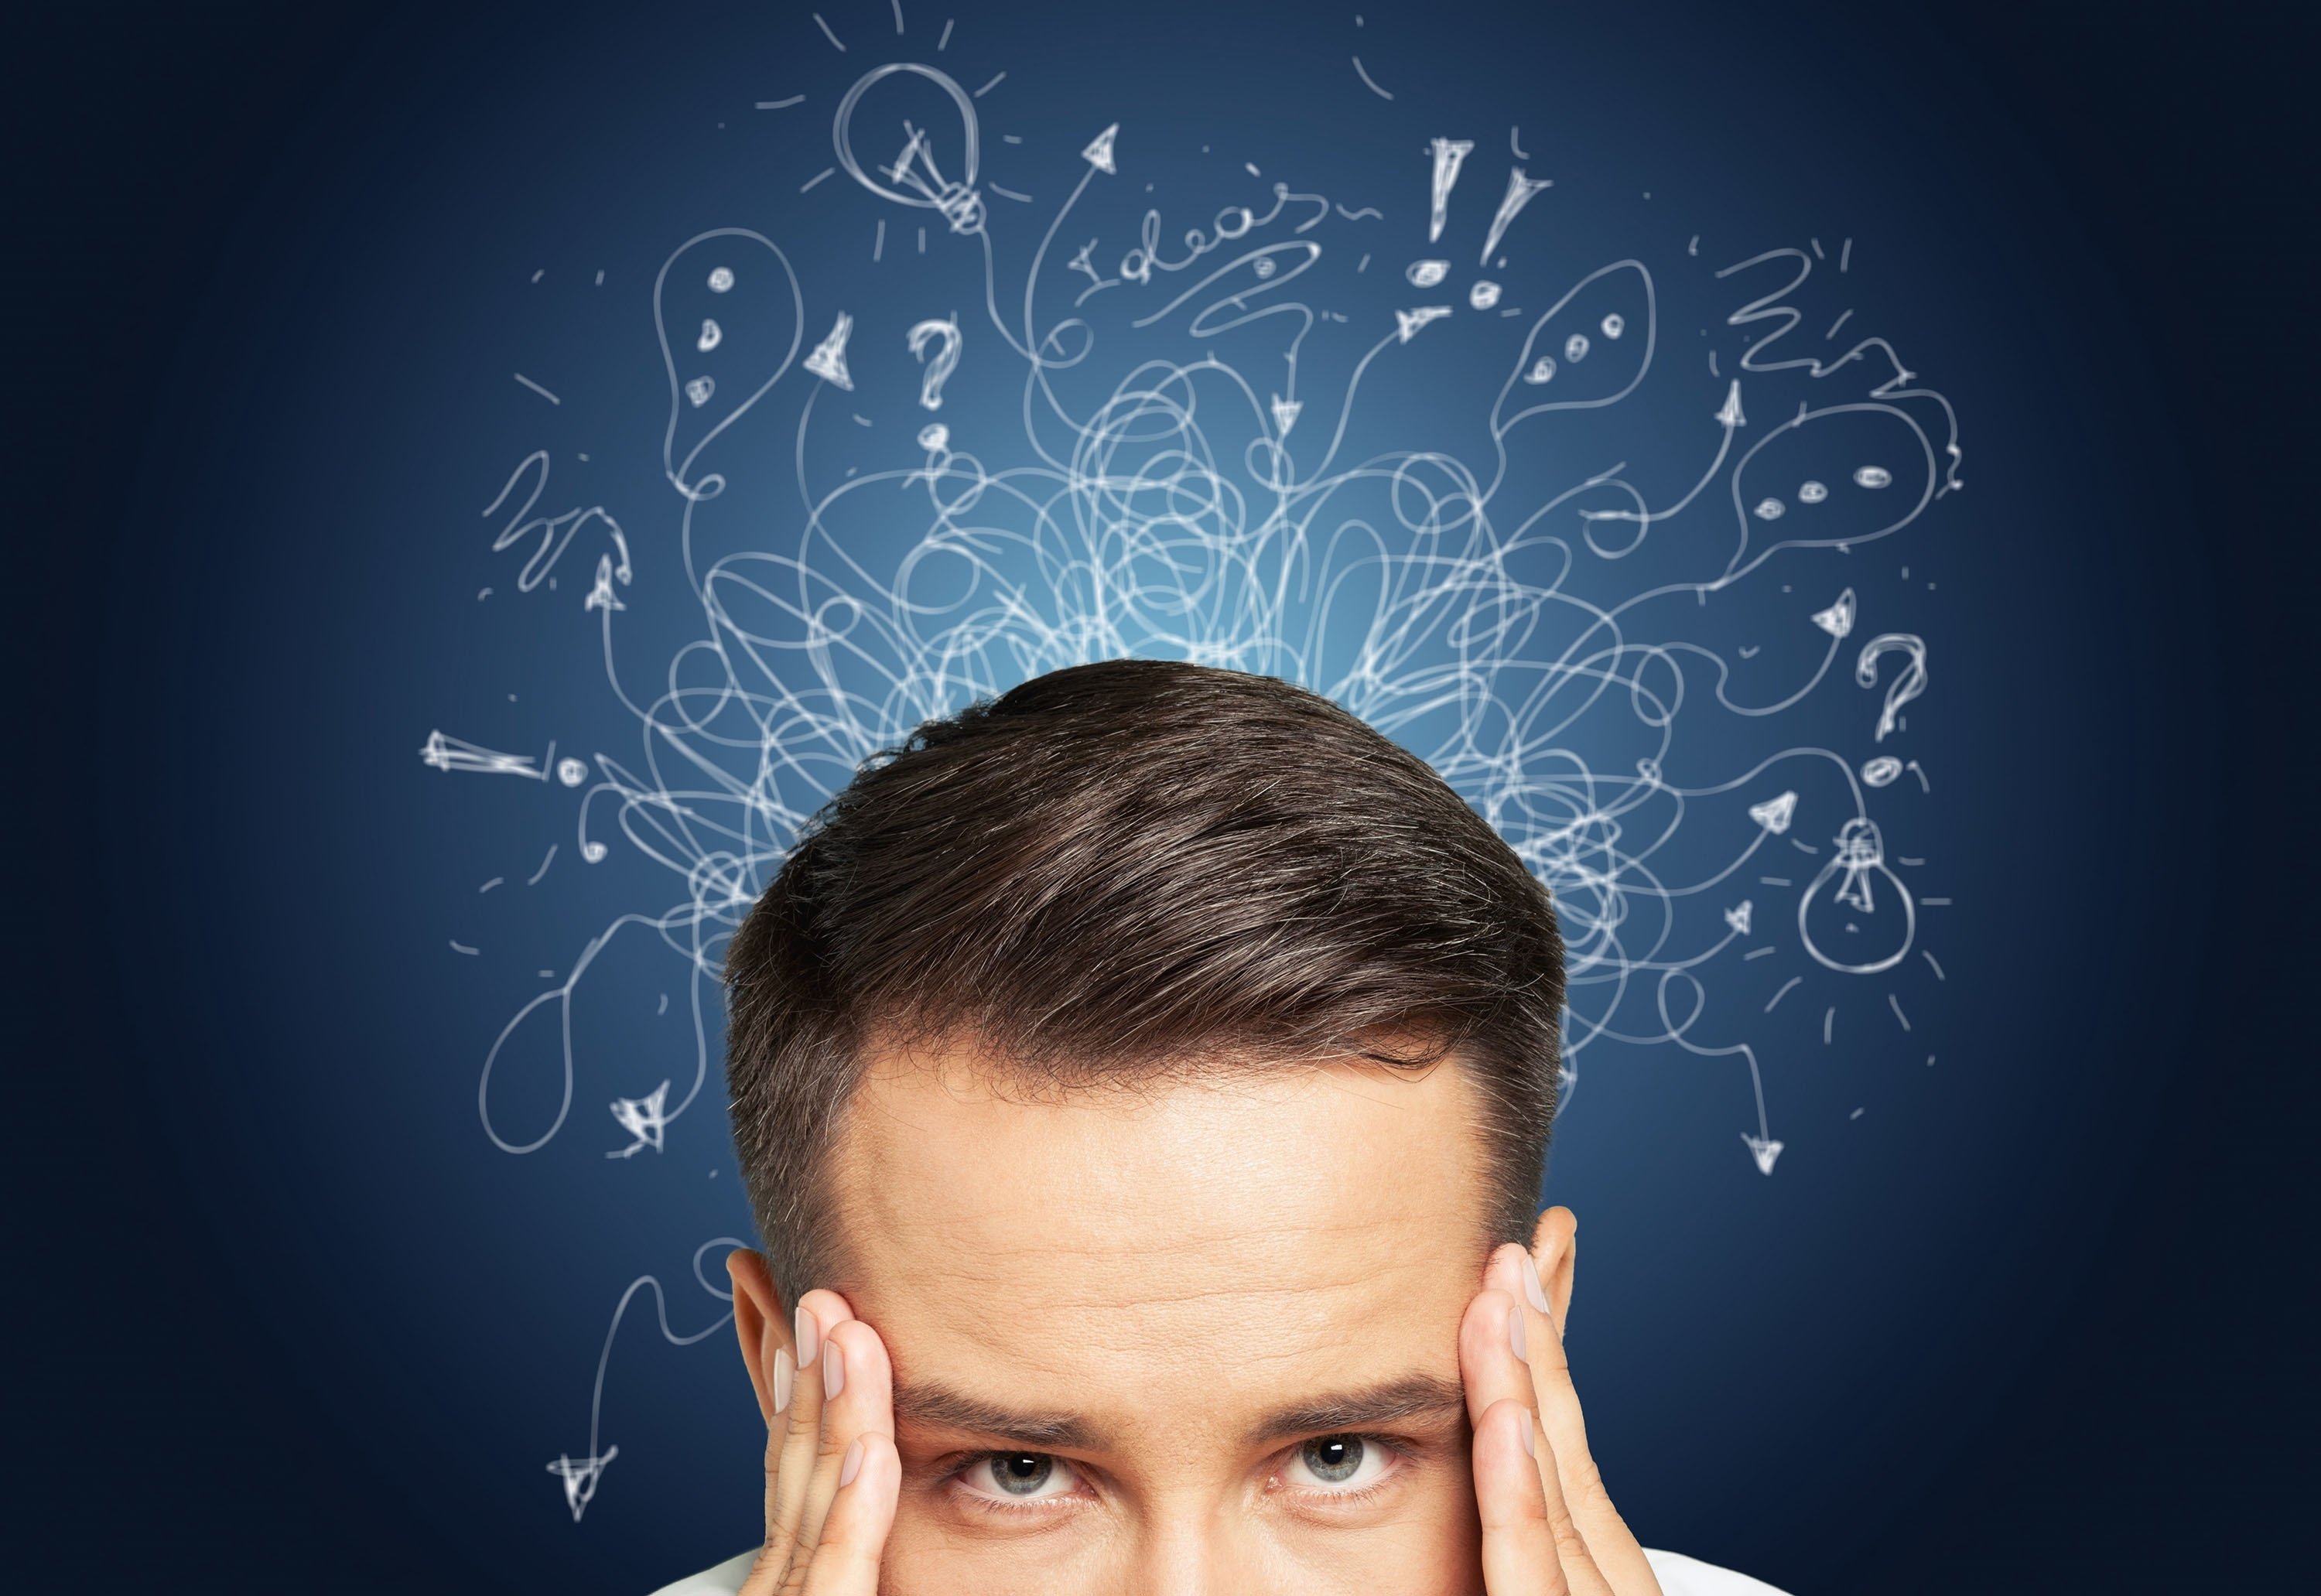 An illustration of a man suffering from confusion. (Shutterstock Photo)